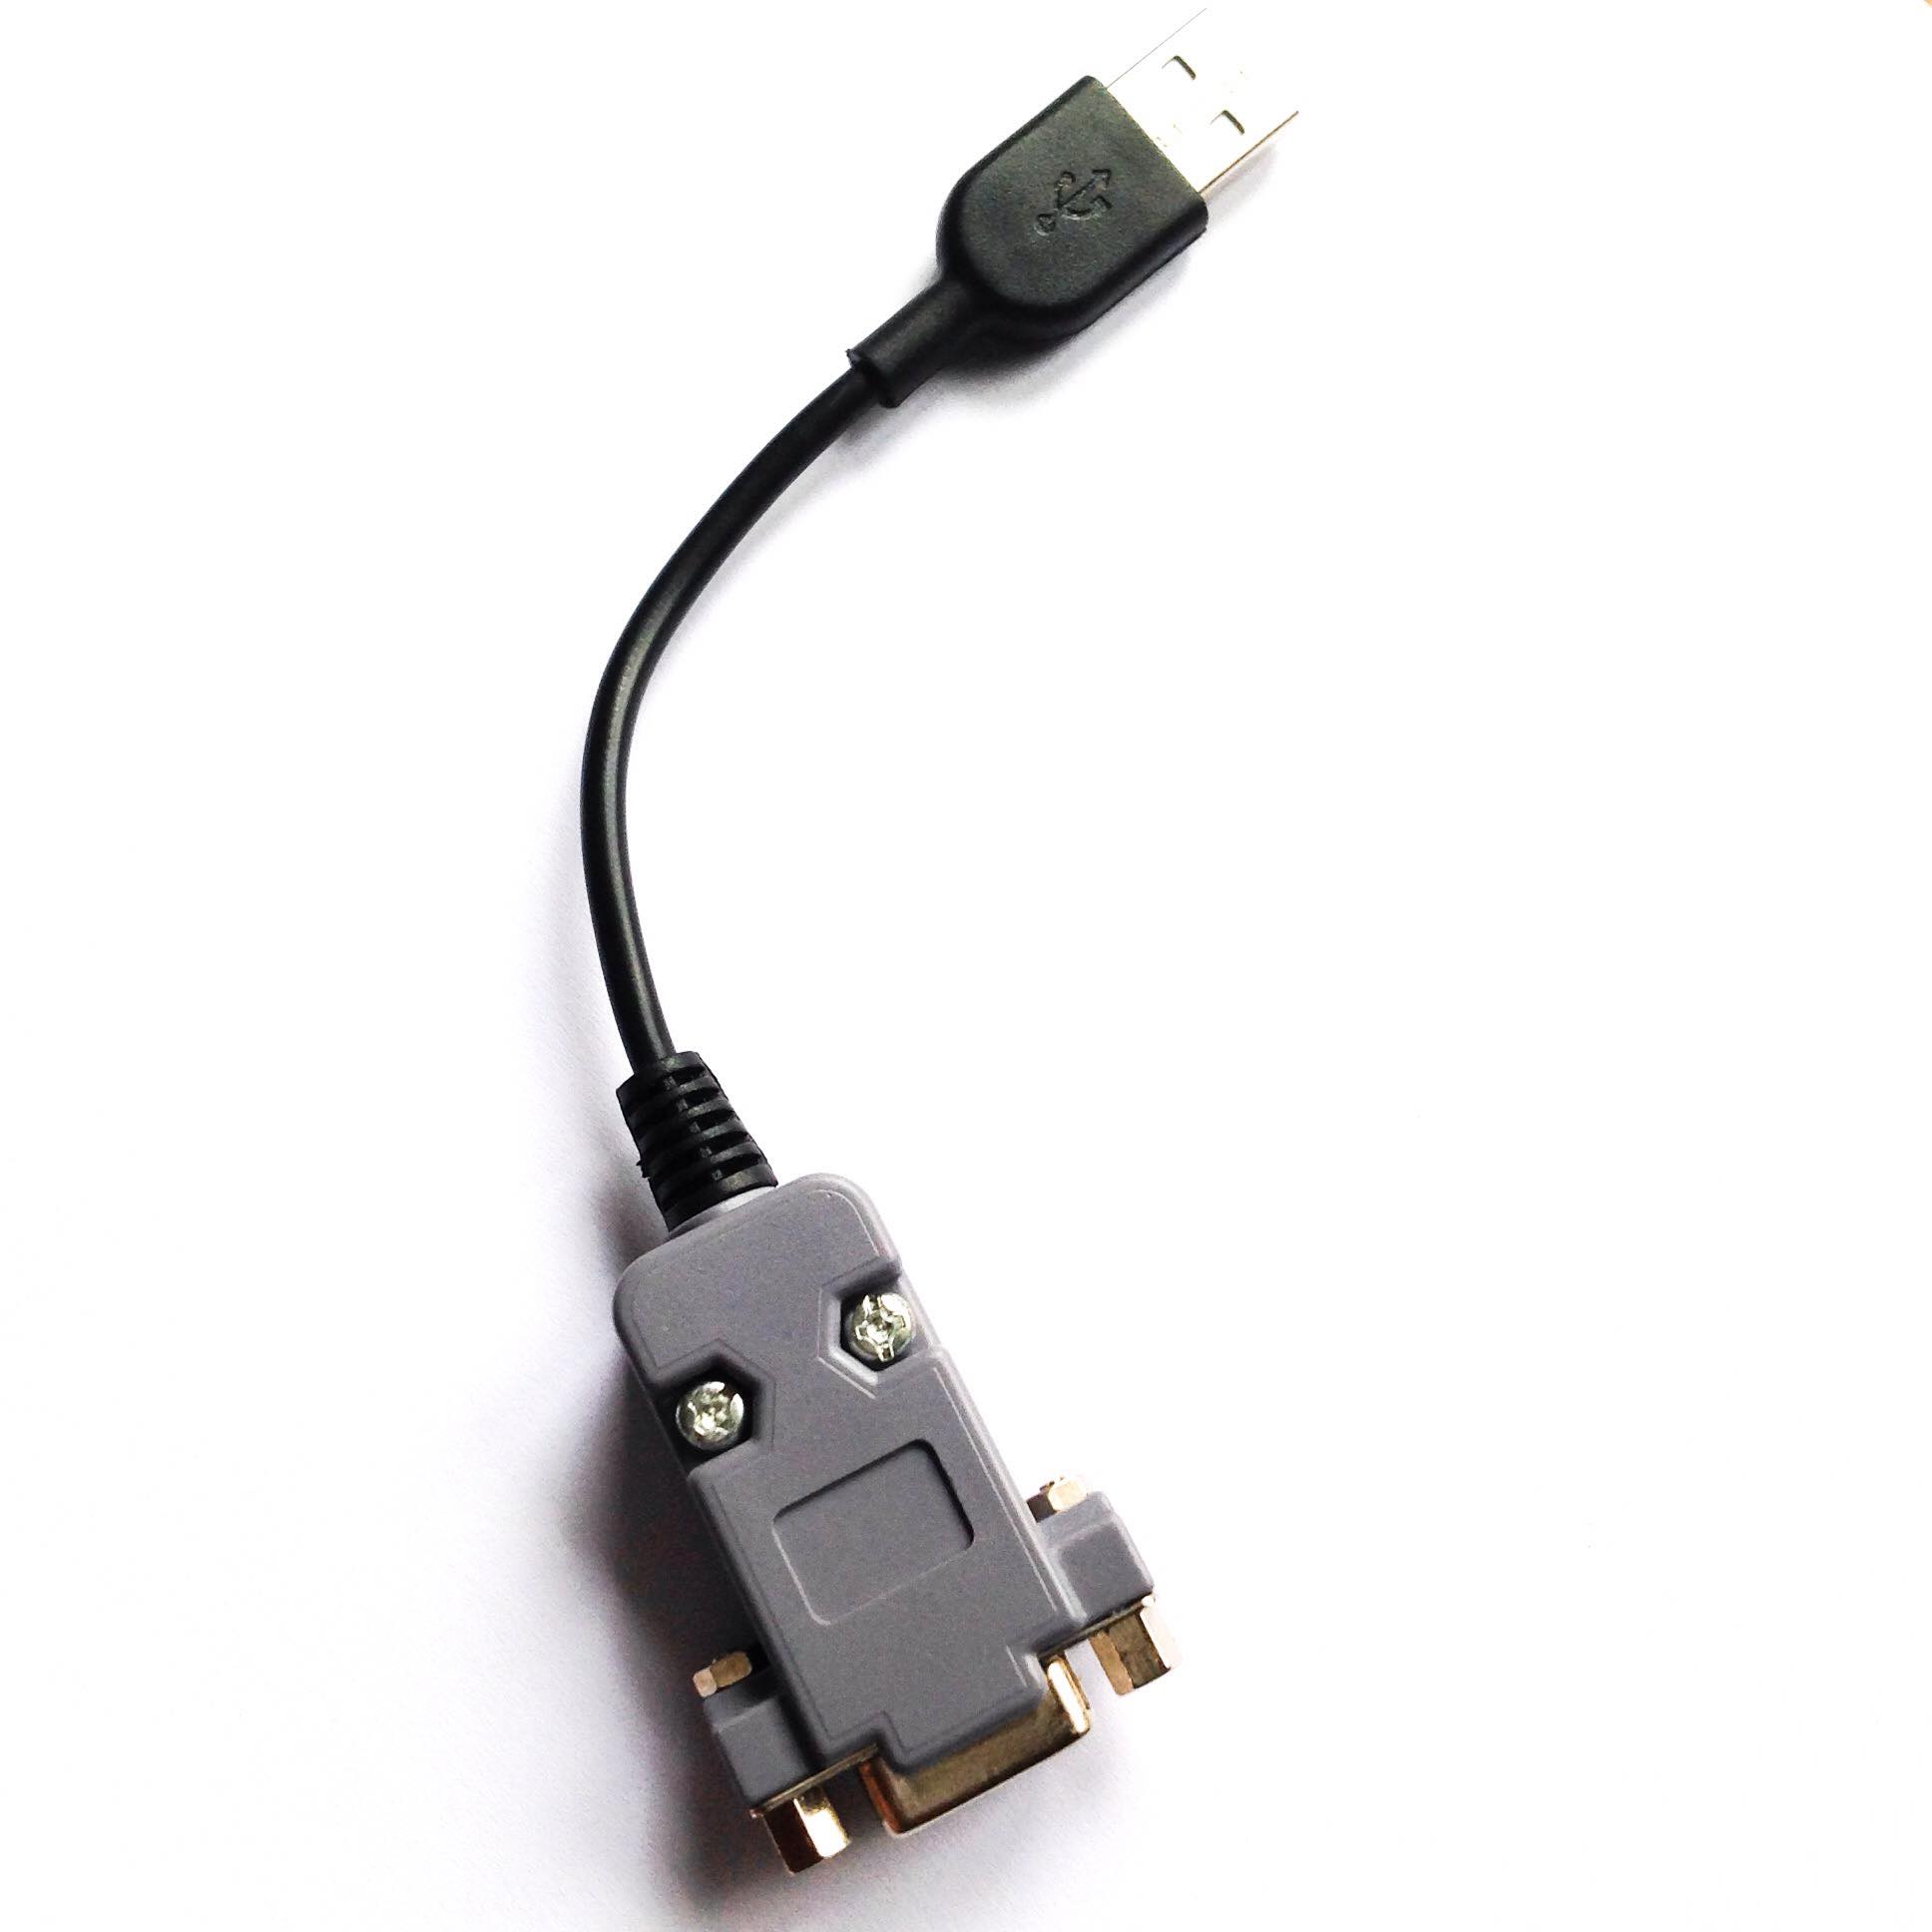 tinkerBOY ADB Keyboard/Mouse to USB Converter with QMK Firmware and Via  support - tinkerBOY